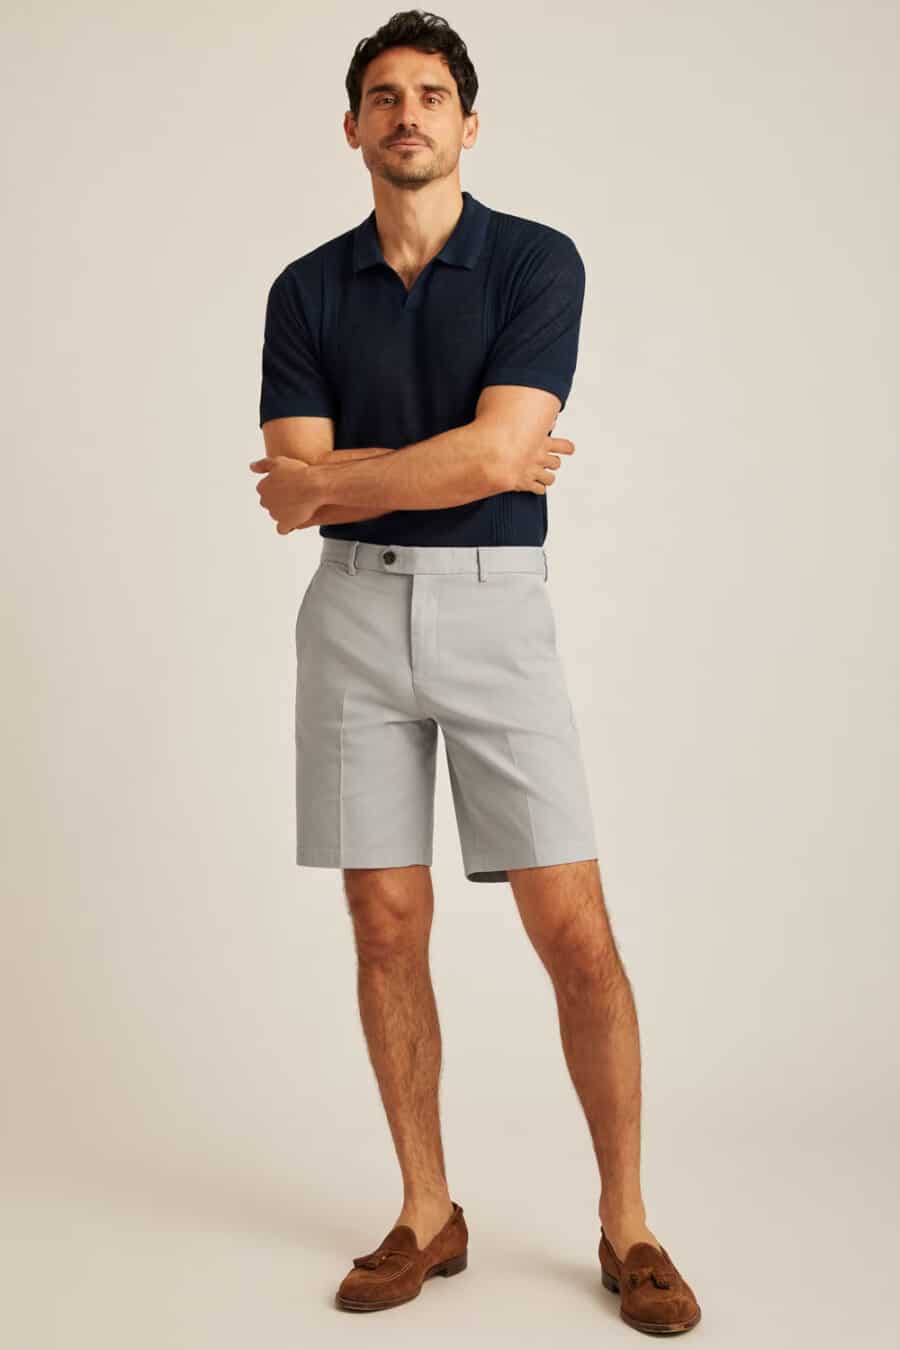 Men's navy knitted polo shirt tucked into tailored grey shorts with suede tan tassel loafers outfit